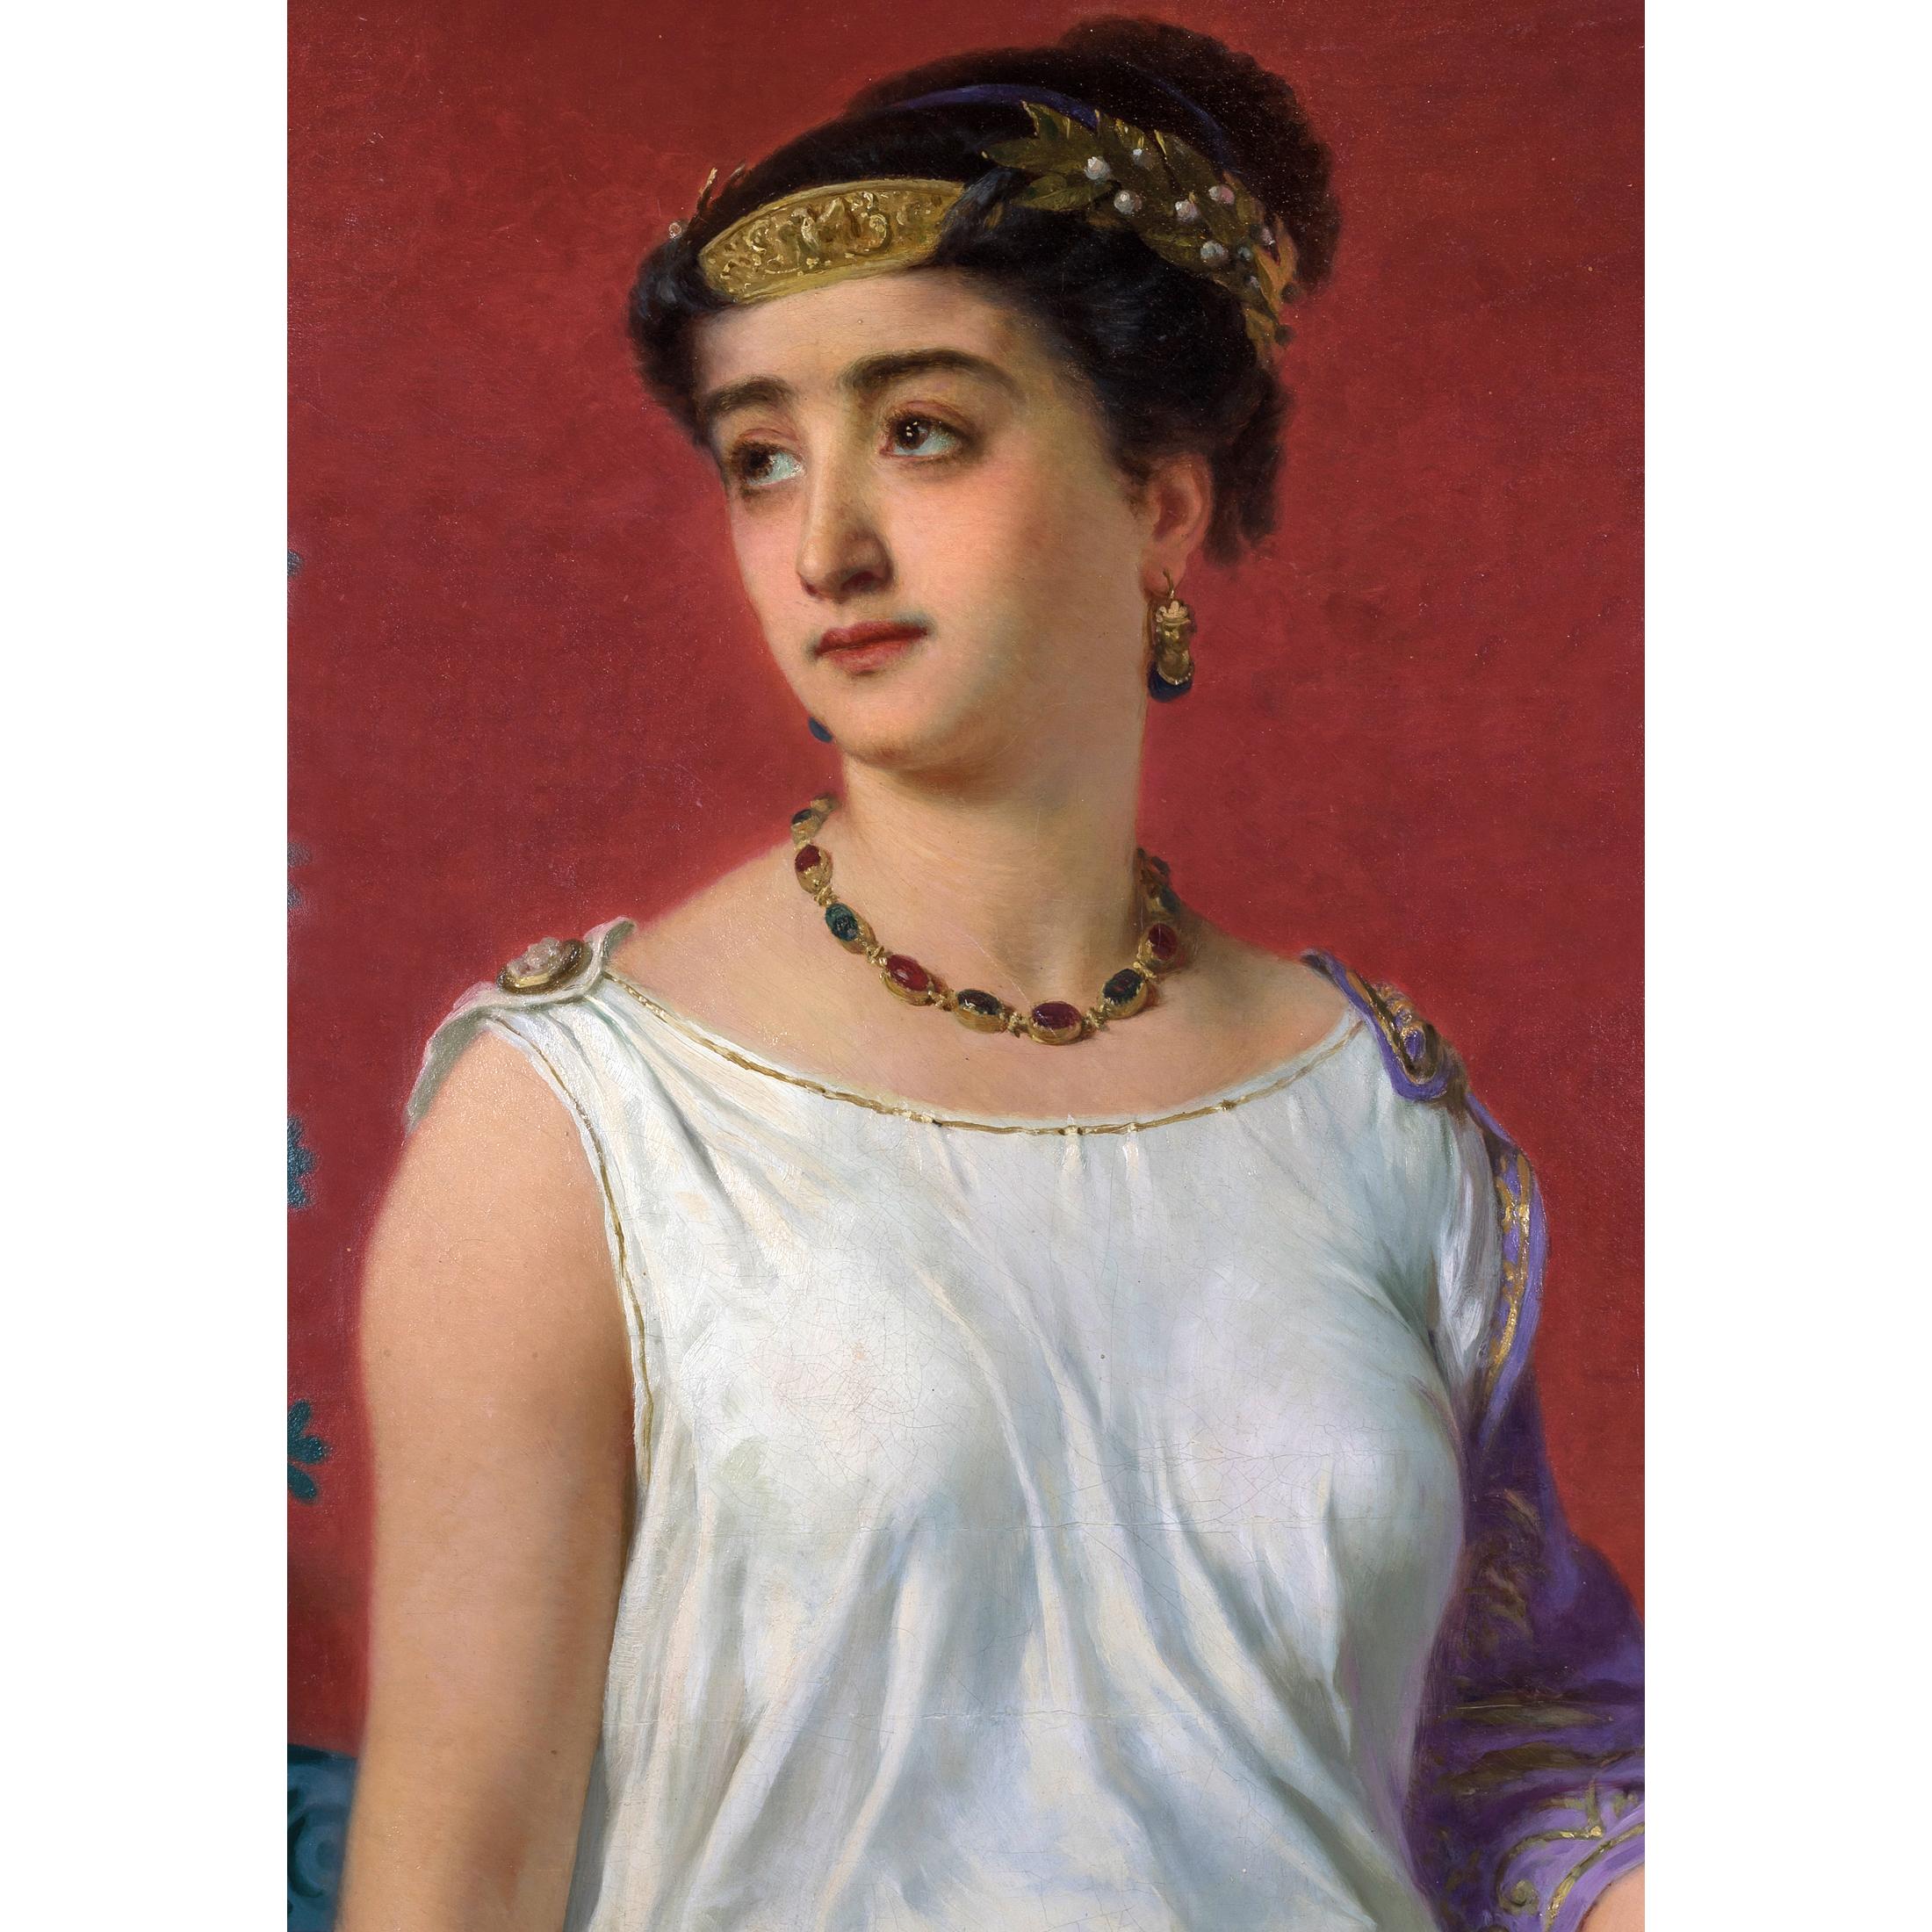 Charles-Édouard Boutibonne
French, 1816–1897

Portrait of a Young Grecian Beauty

Signed 'E. Boutibonne' L/R 

Oil on canvas
Measures: 46 in x 28 1/2 inches
Frame: 53 in. x 36 in. inches.